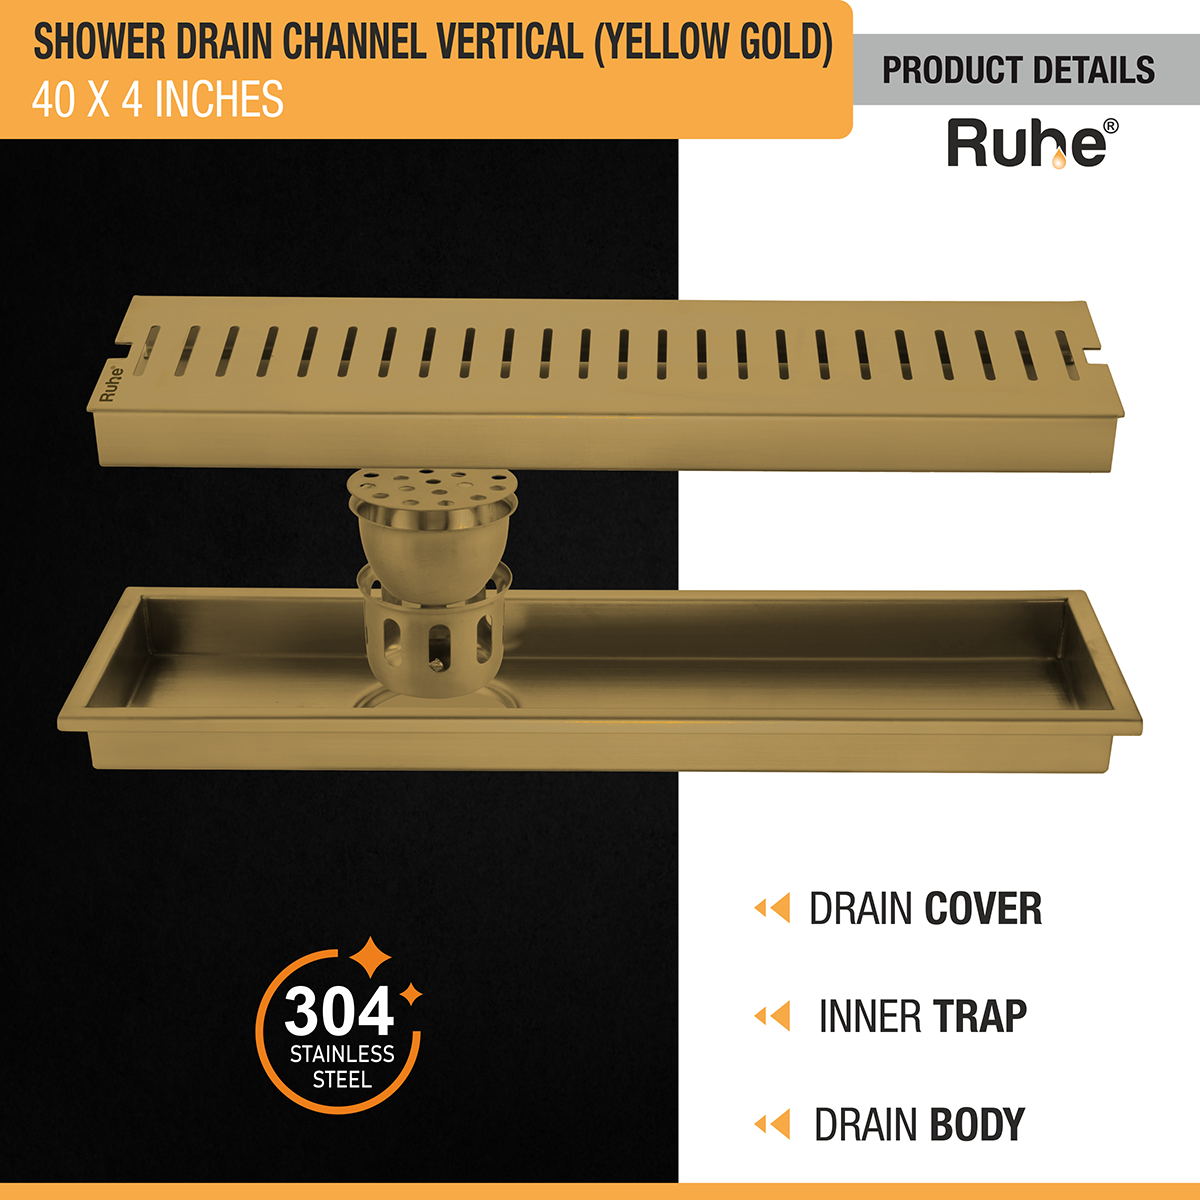 Vertical Shower Drain Channel (40 x 4 Inches) YELLOW GOLD product details